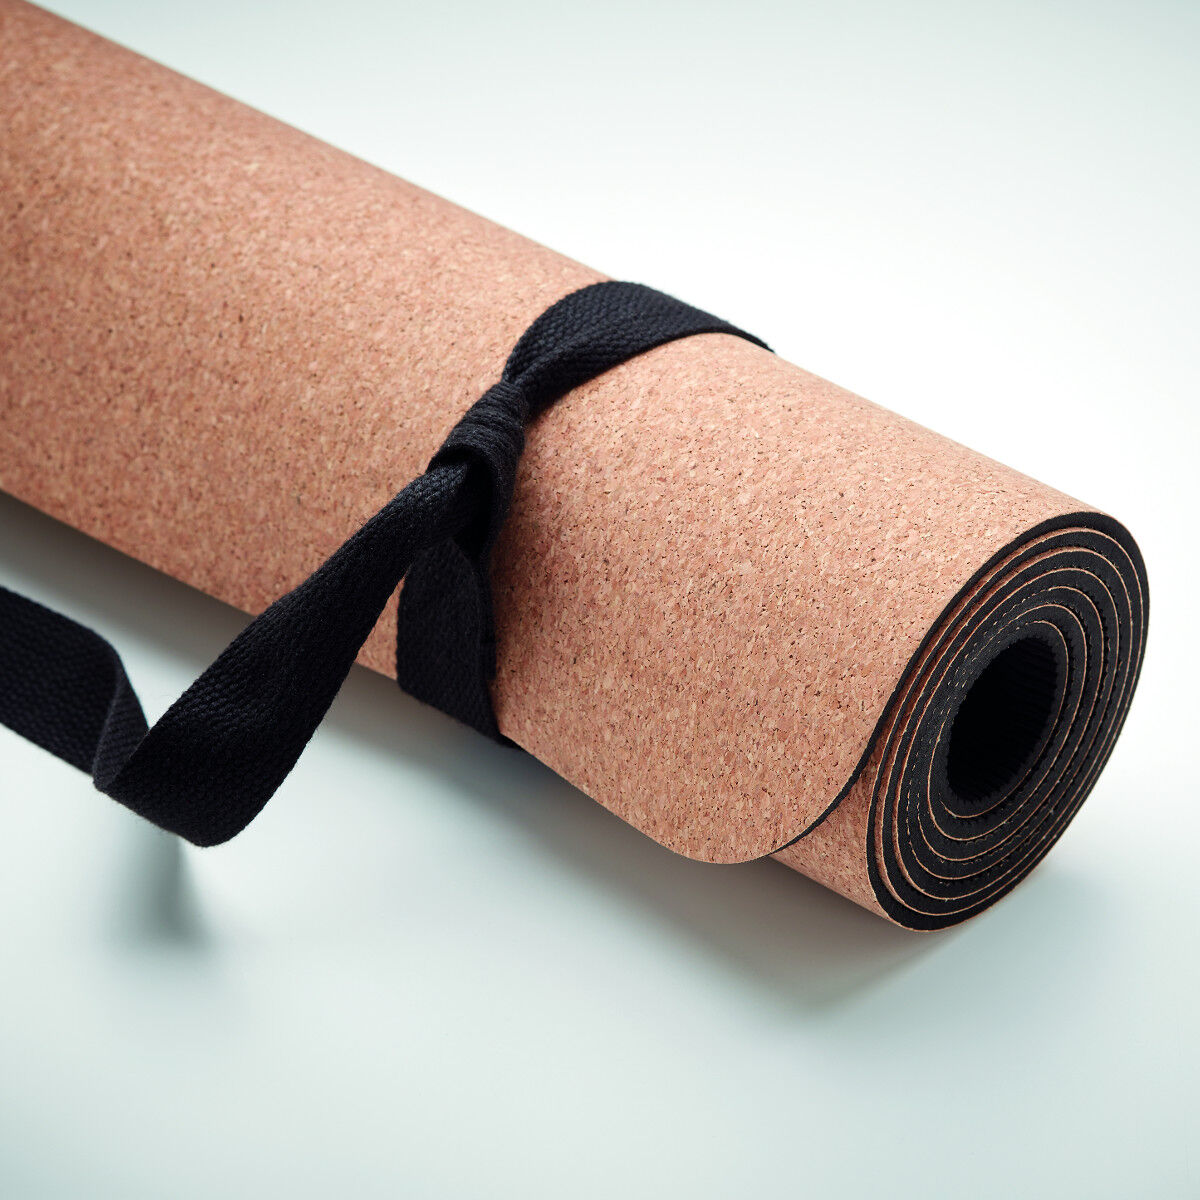 Yoga exercise mat made of cork material